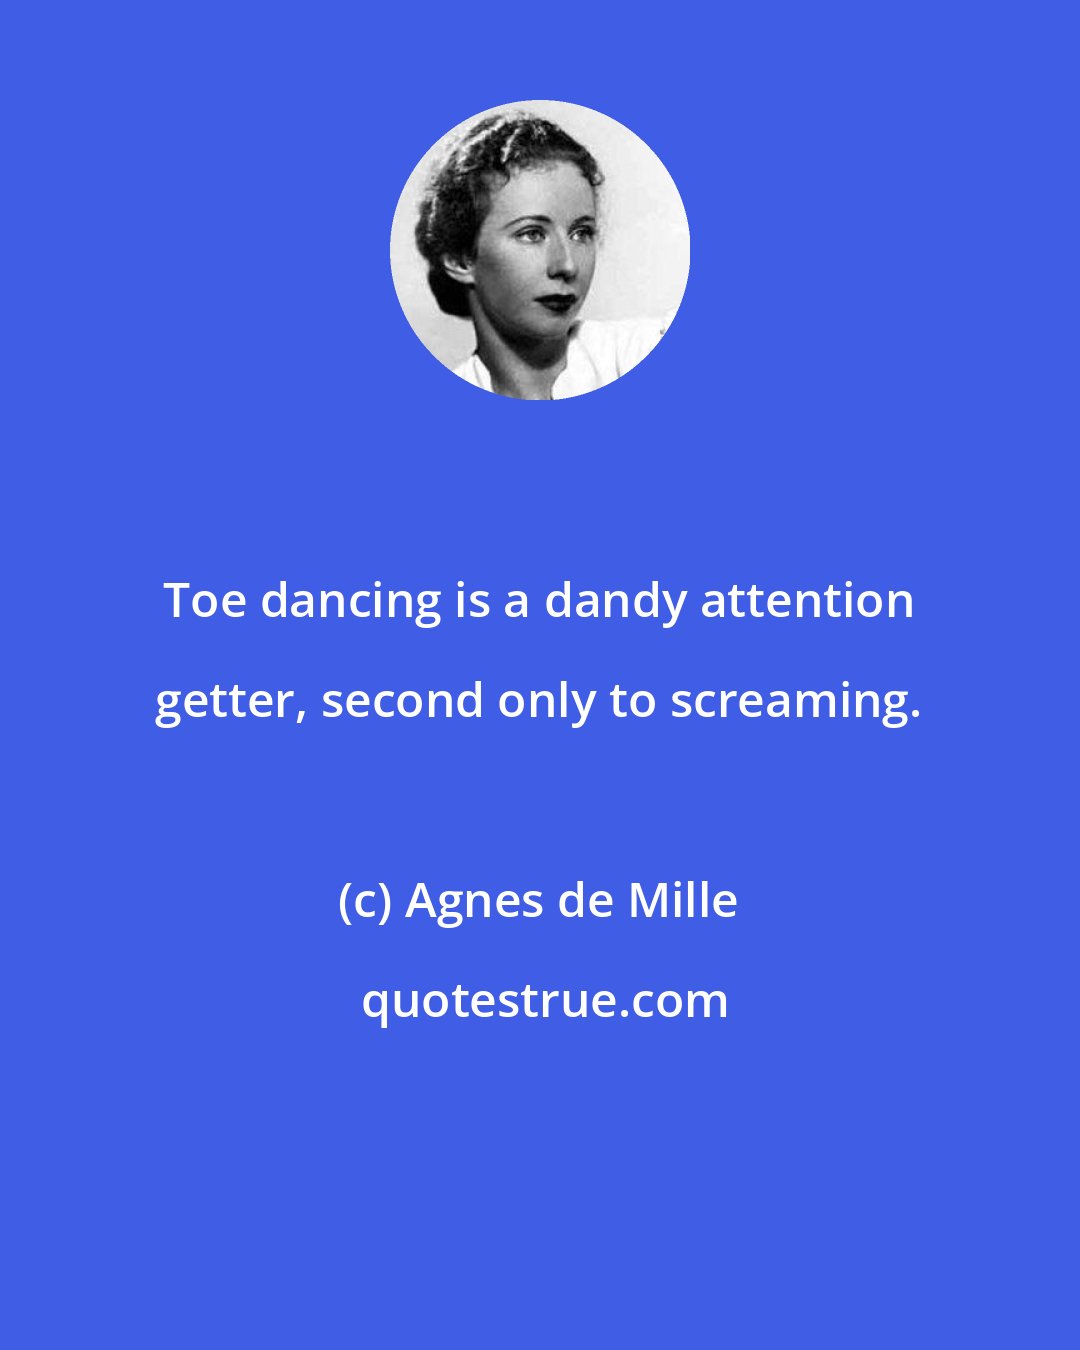 Agnes de Mille: Toe dancing is a dandy attention getter, second only to screaming.